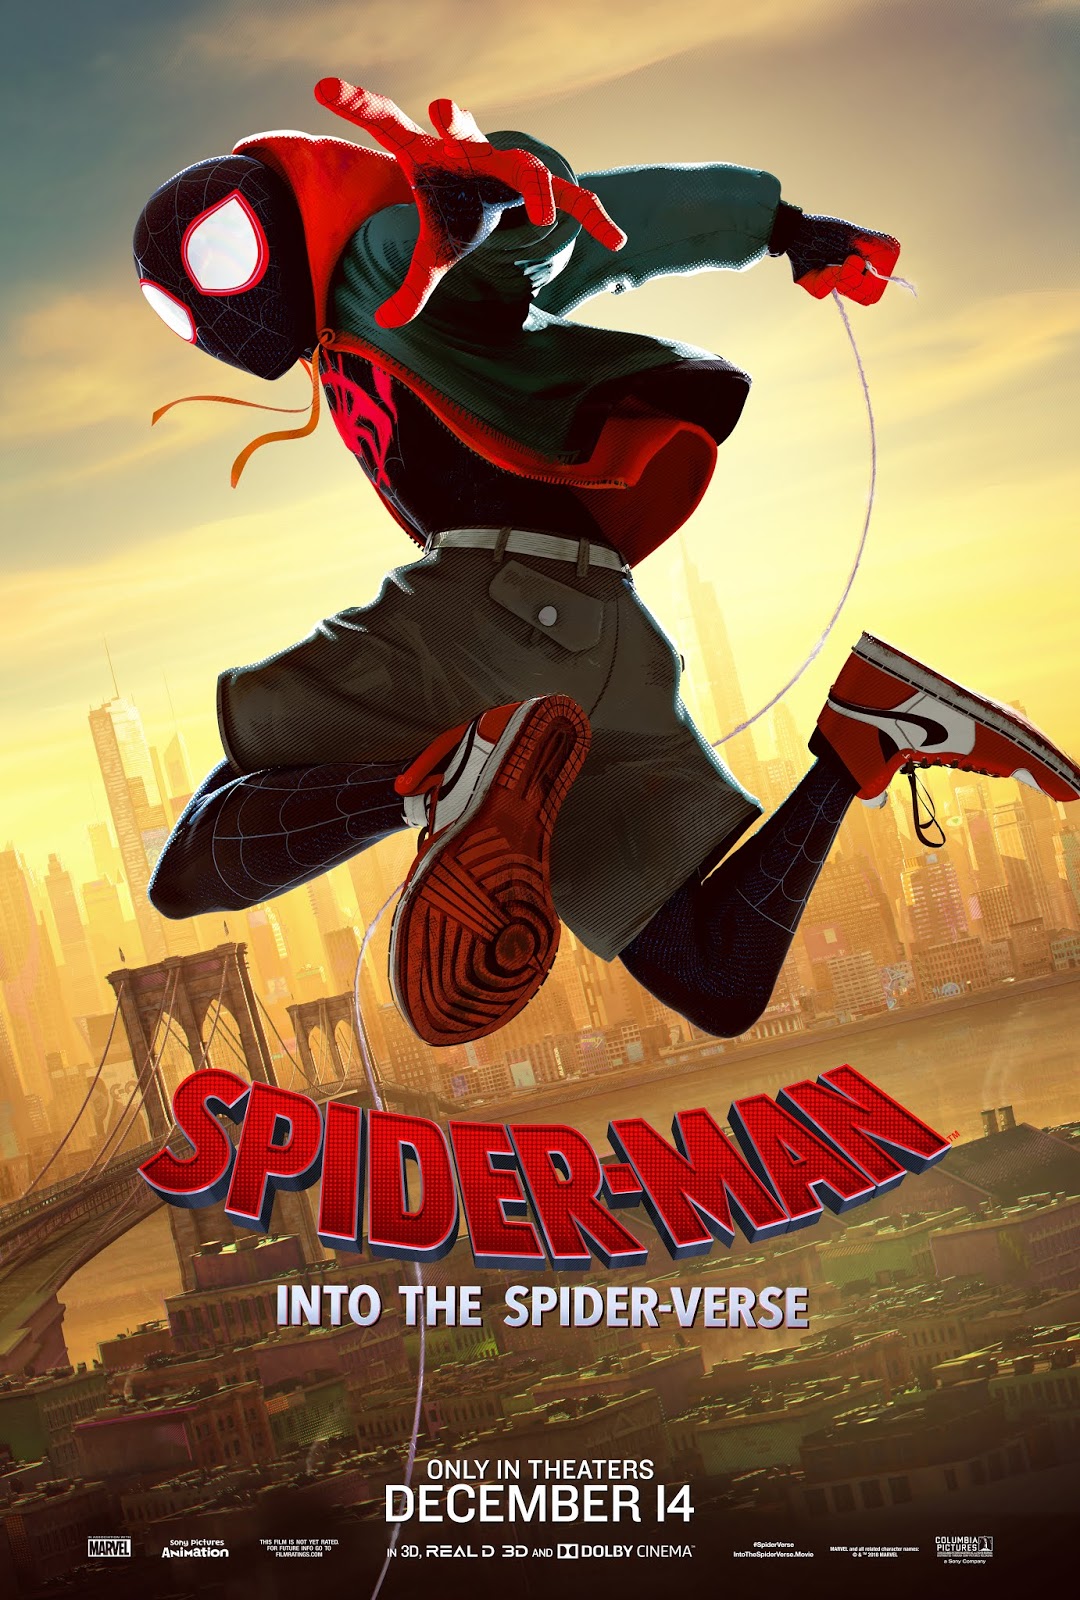 MOMMY BLOG EXPERT: Spider-Man Into the Spider-Verse Movie Review